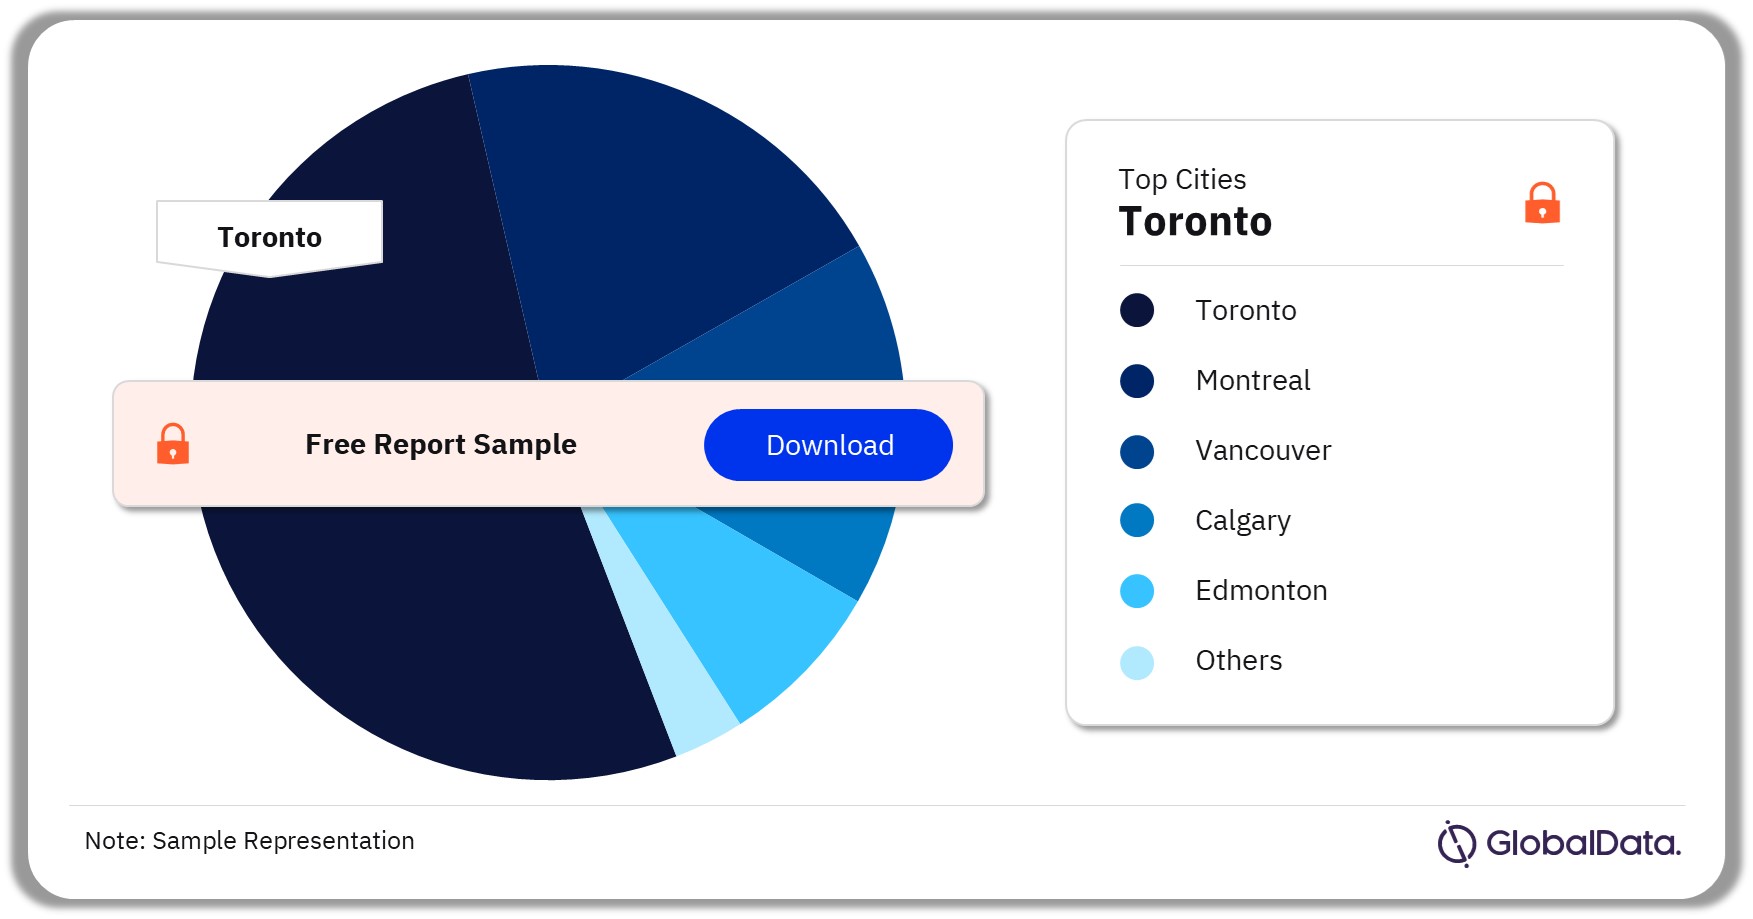 Canada Make-up Market Analysis, by Top Cities, 2021 (%)